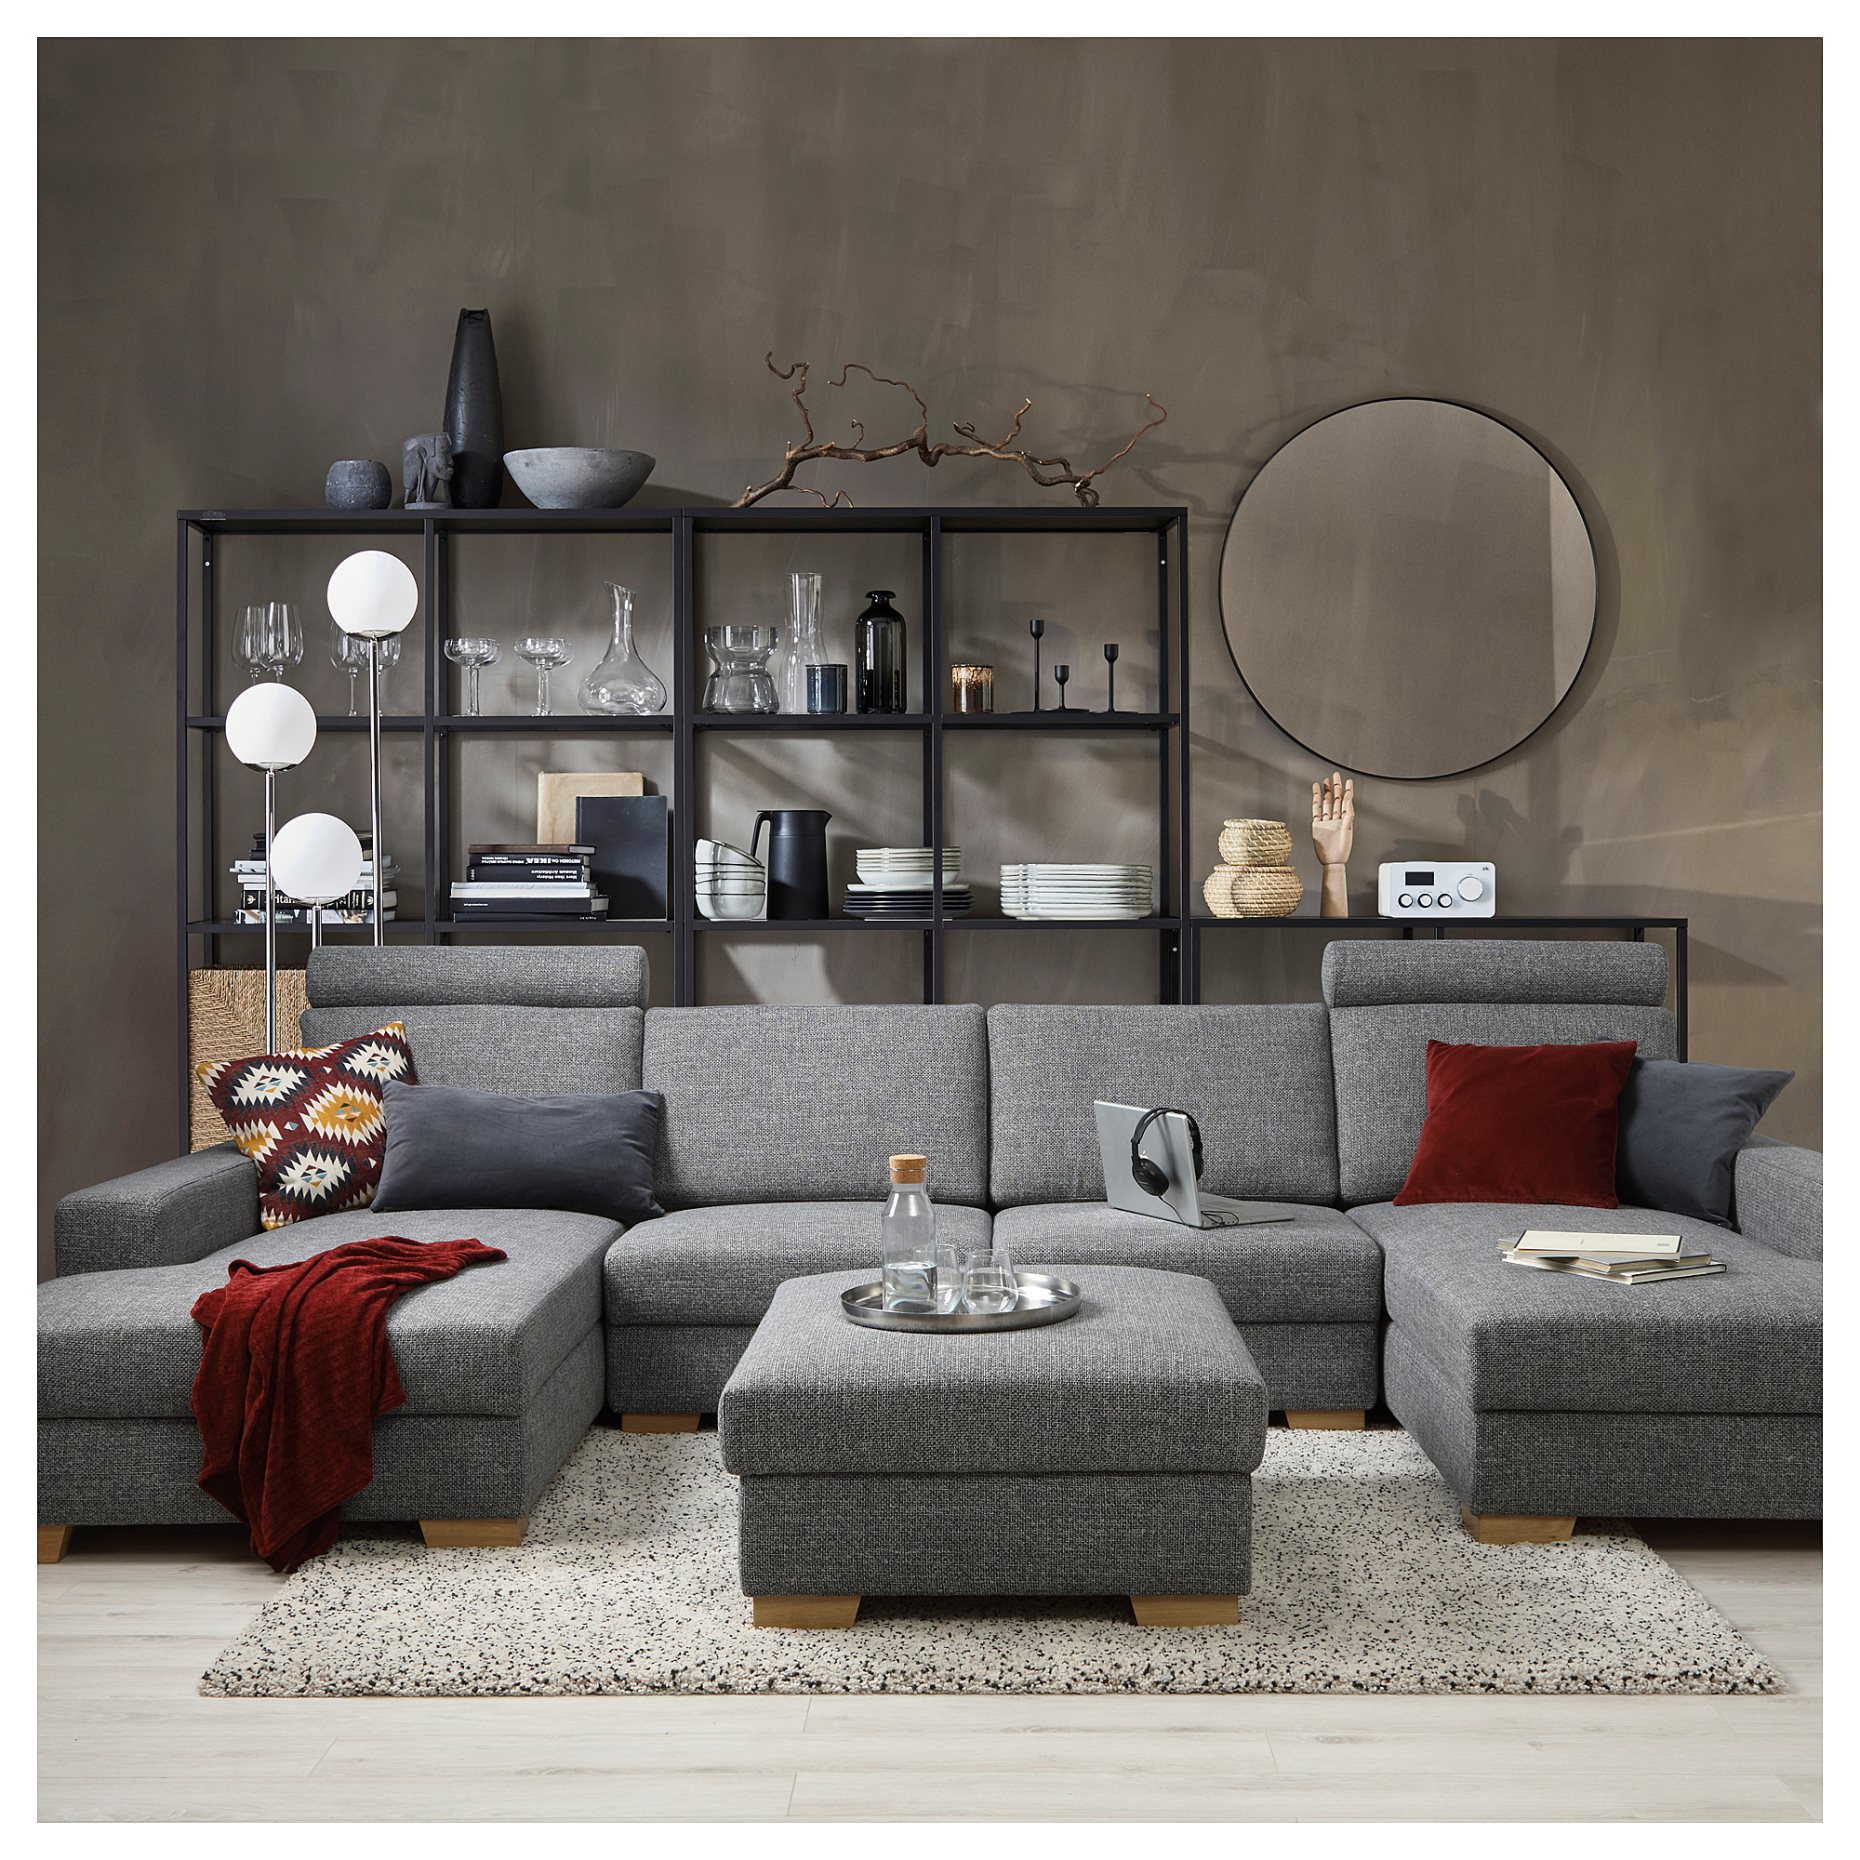 SÖRVALLEN, 4-seat sofa with chaise longues, 593.041.46